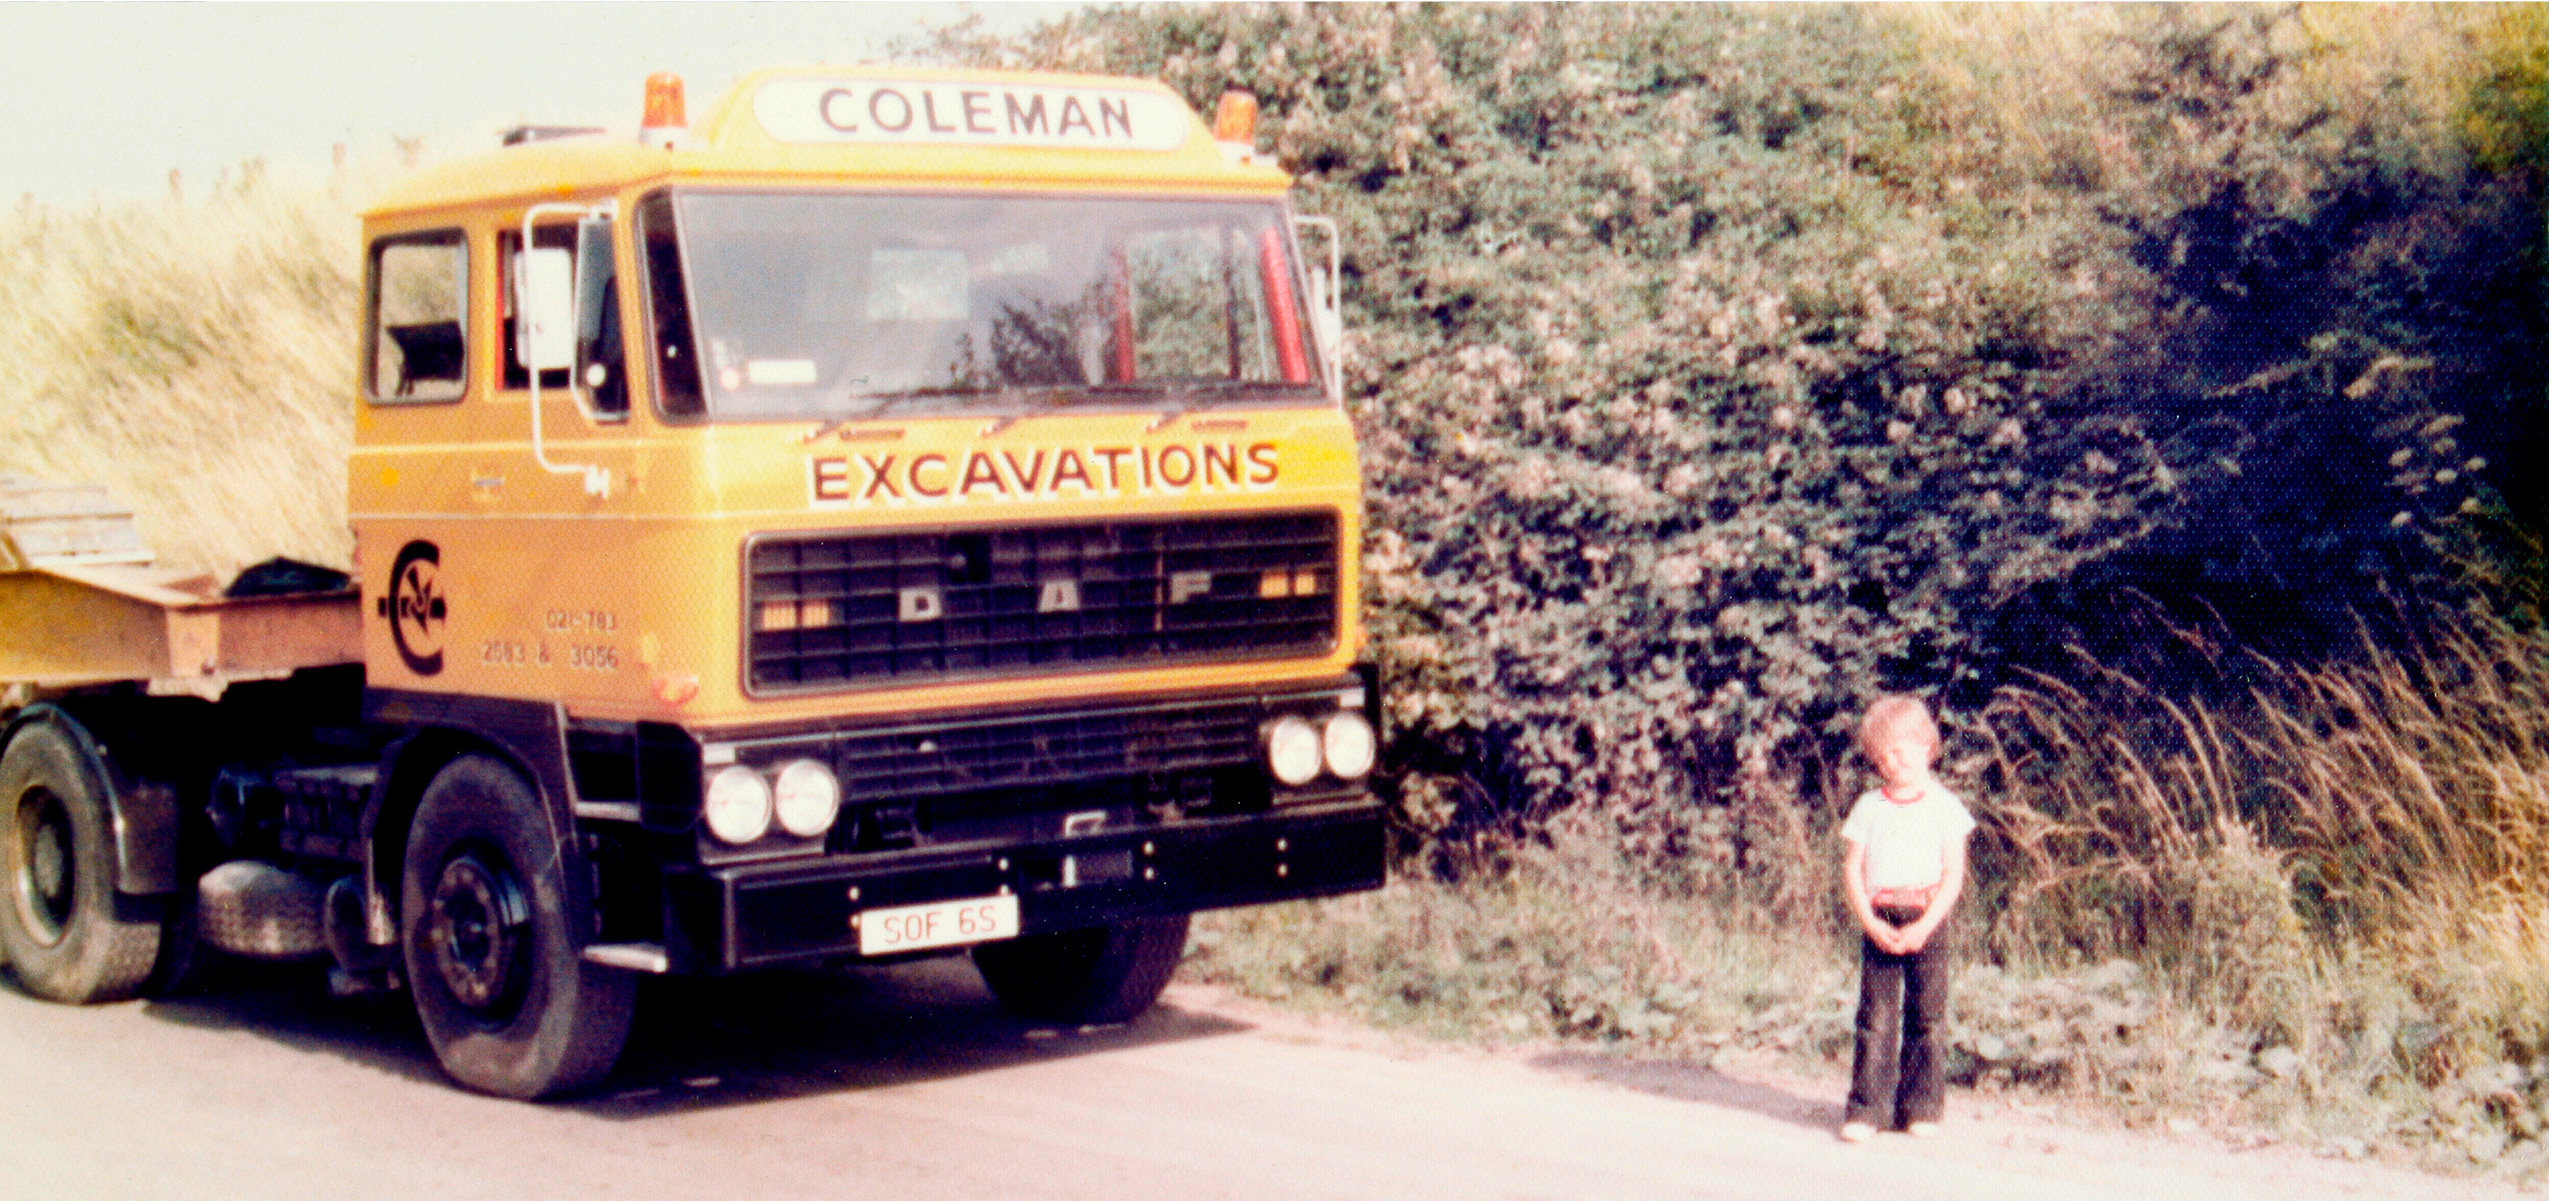 Image of Mark Coleman as a small child stood outside next to a yellow van with Coleman branding on it.